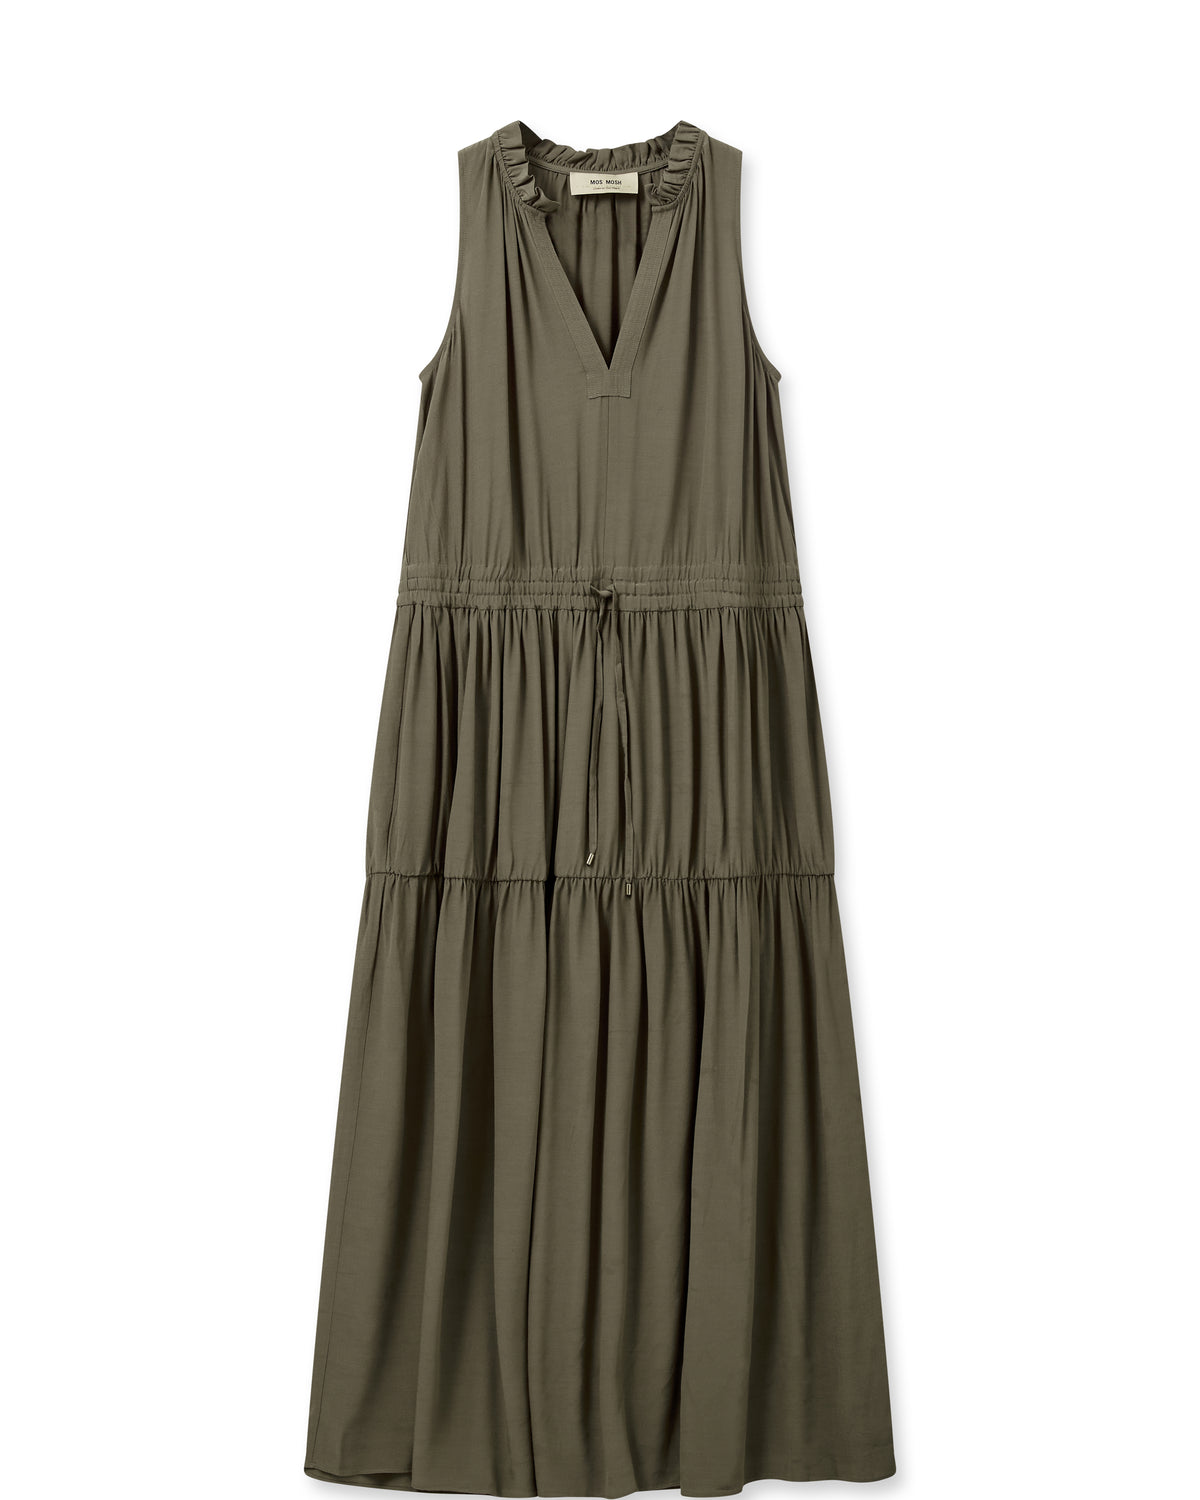 Khaki green tiered dress with small ruffle detail at the neck and a elasticated waist